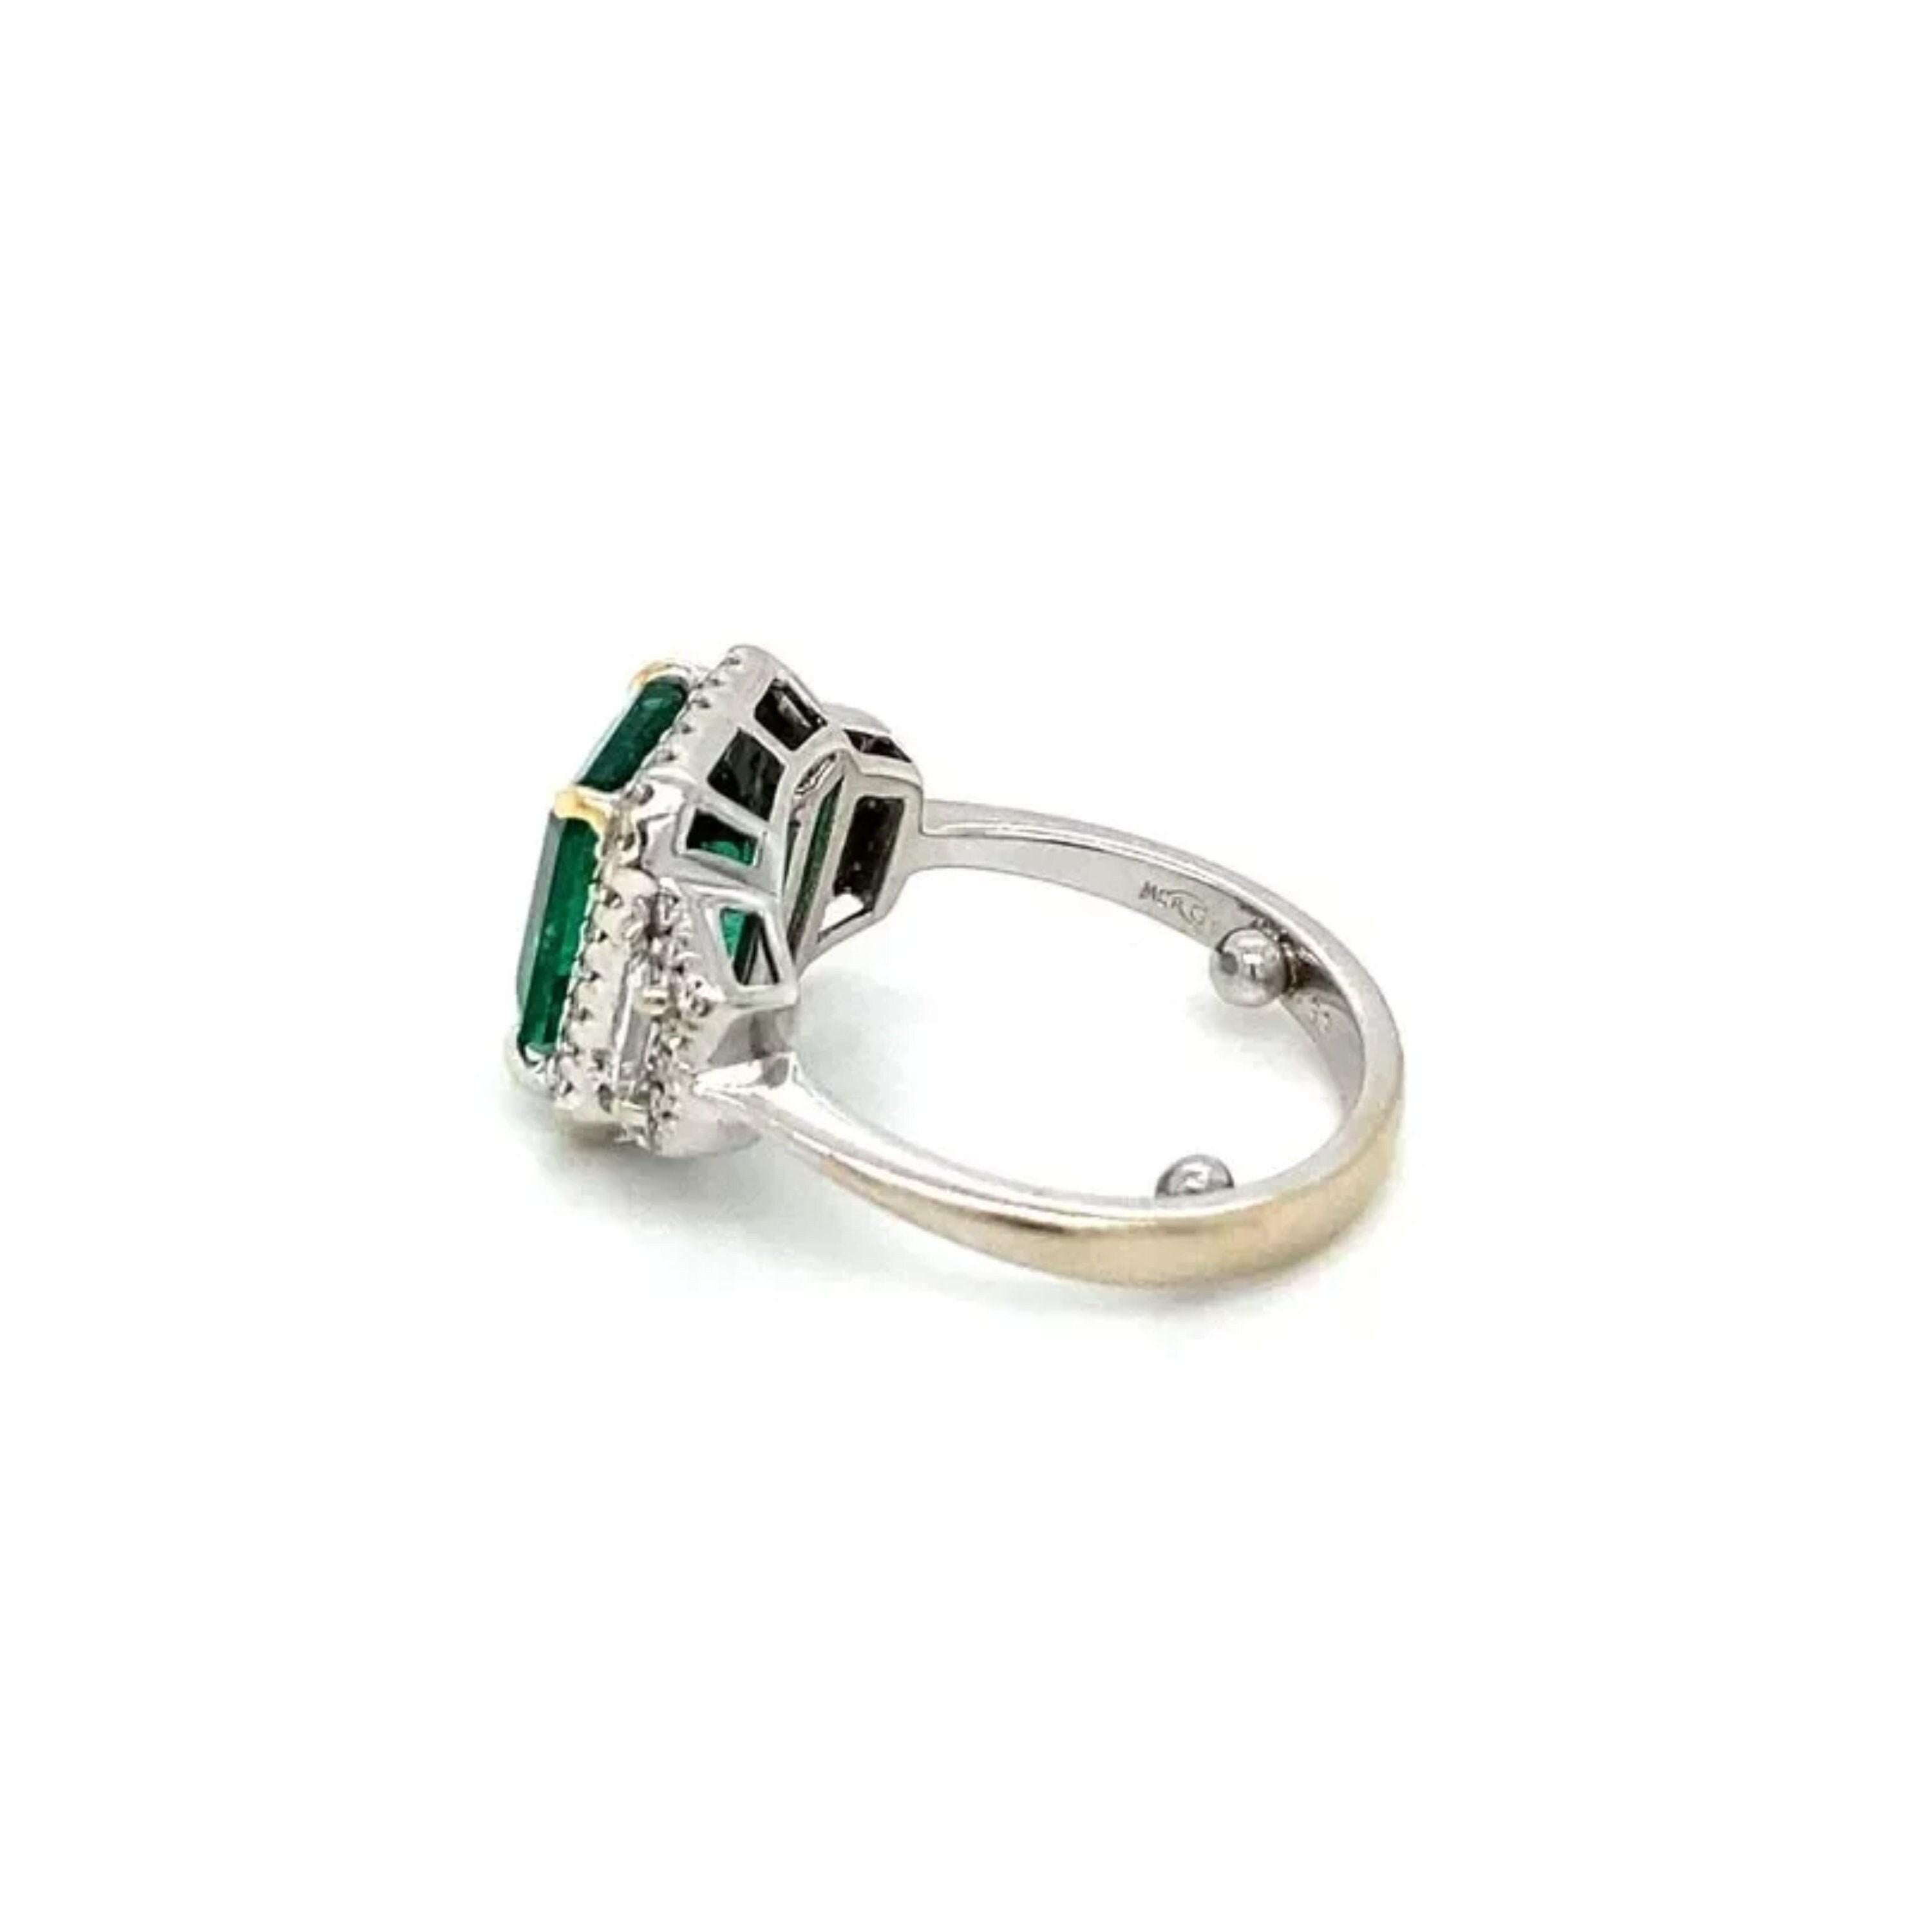 For Sale:  Emerald Engagement Ring, Emerald Cut Emerald Wedding Ring 3